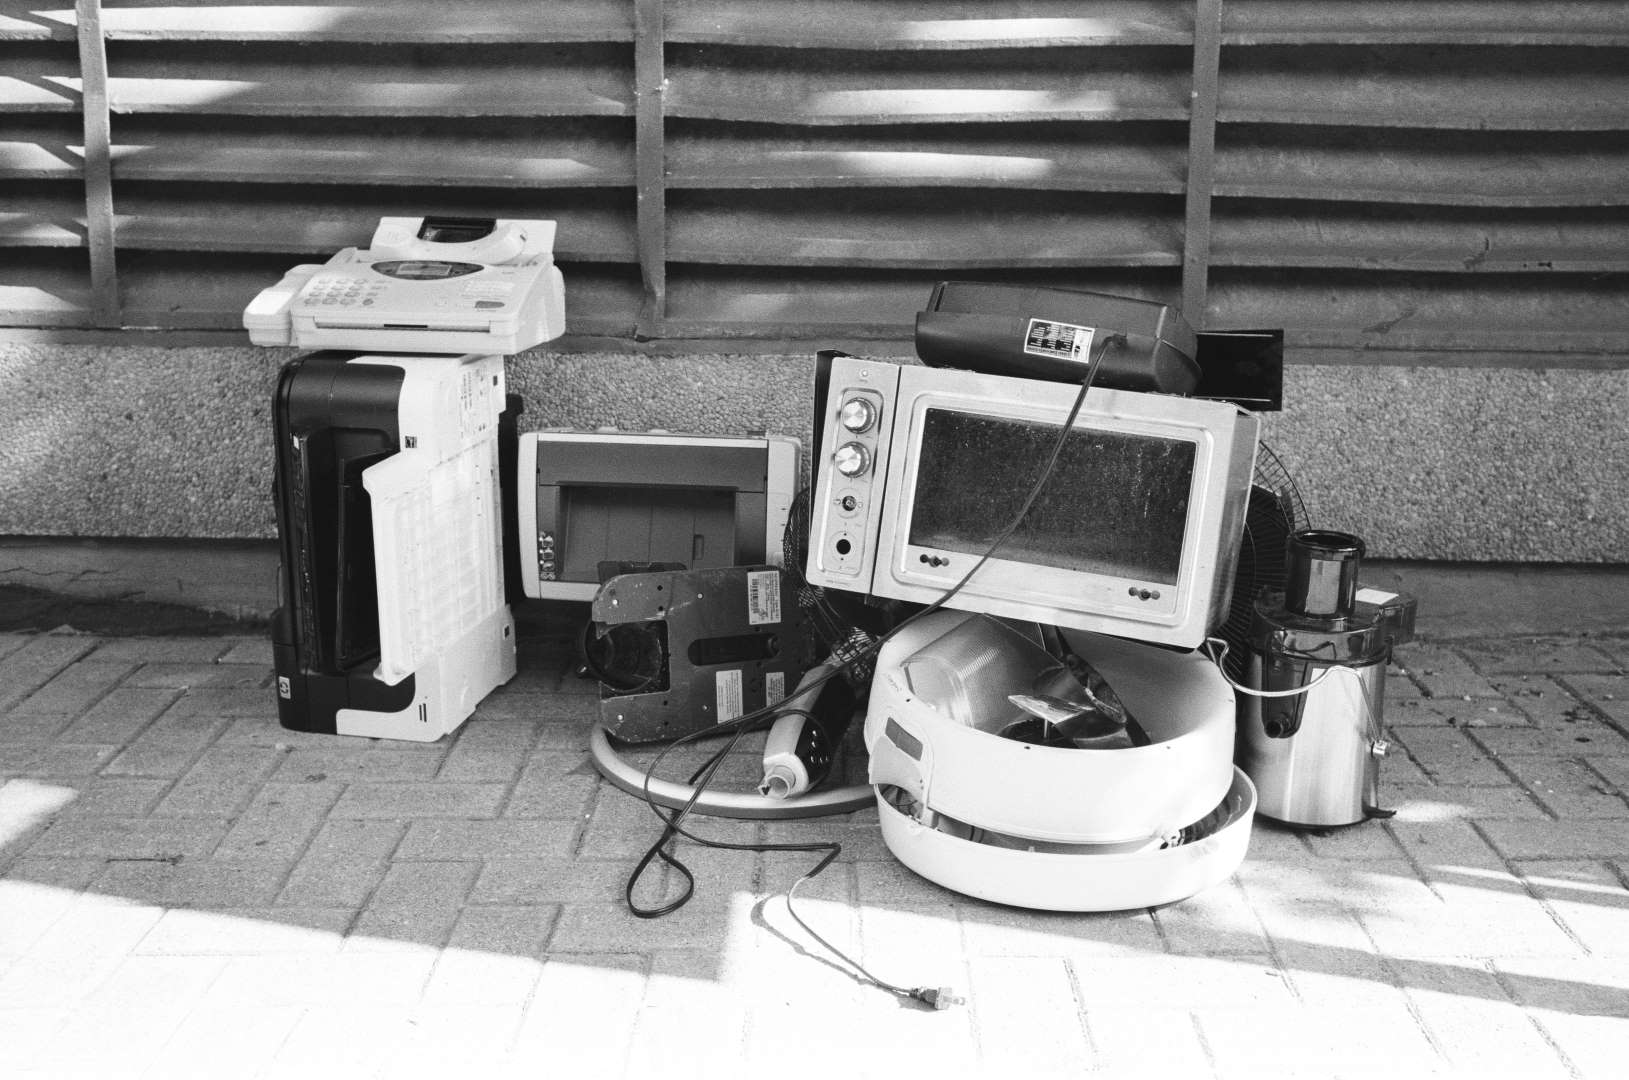 A black and white photograph of home appliances left on the sidewalk: a fax machine, printer, toaster oven, a juicer, and a fan.